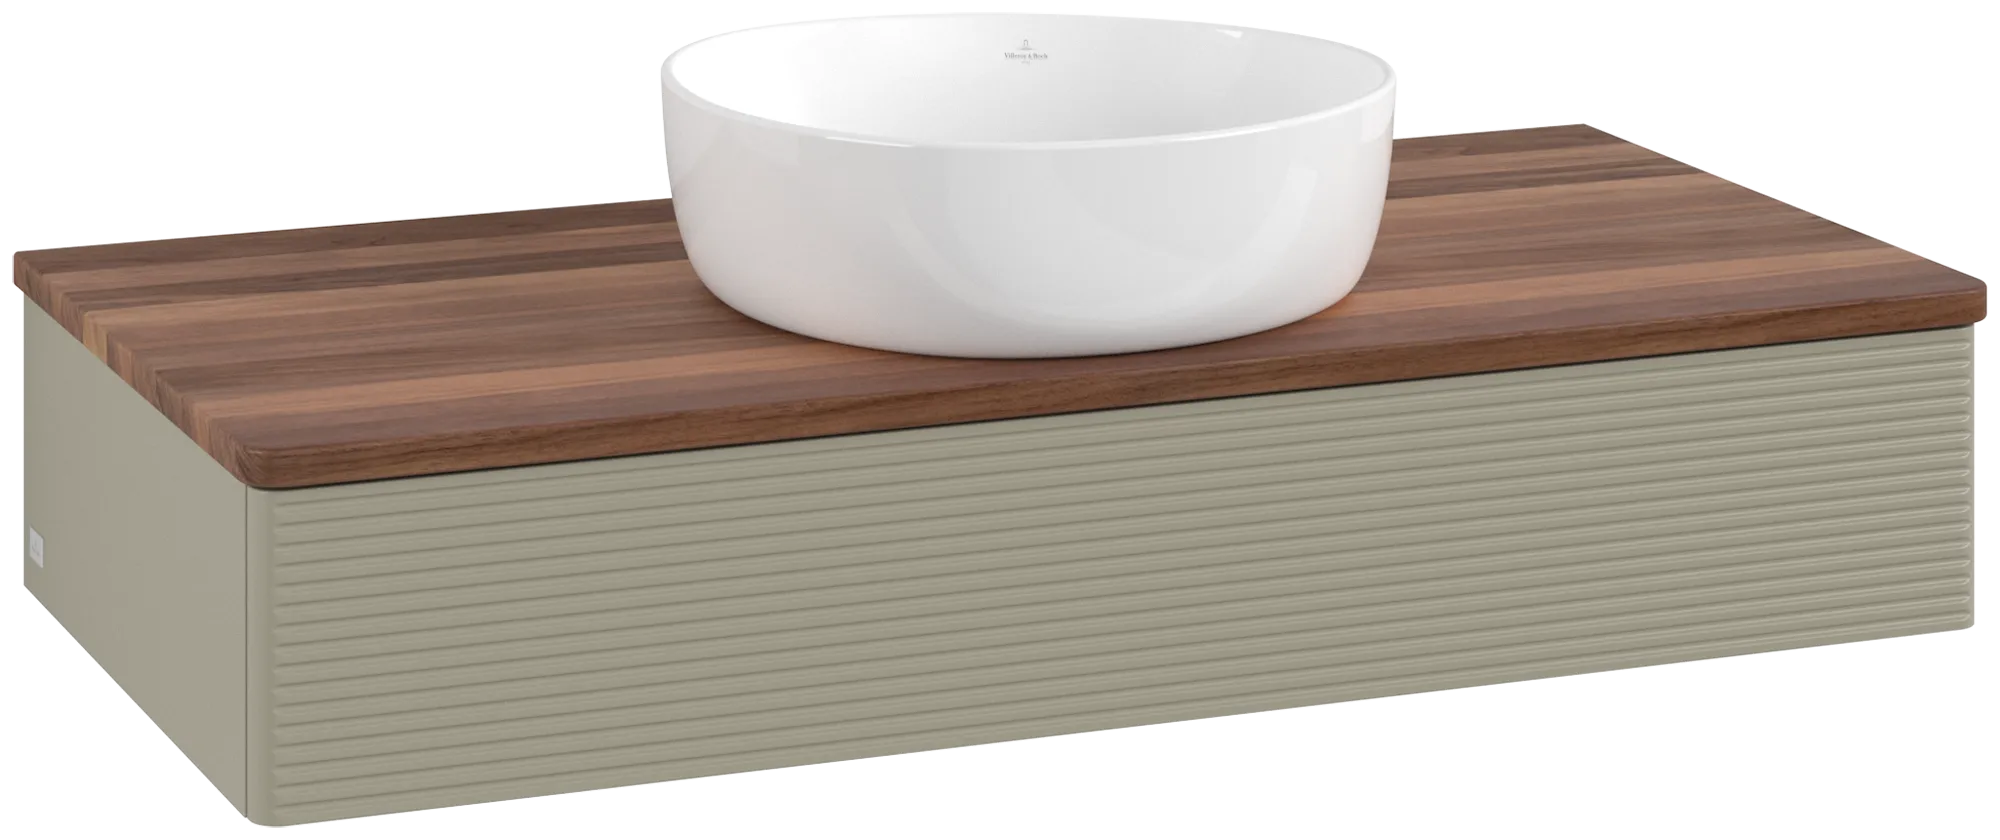 Picture of VILLEROY BOCH Antao Vanity unit, 1 pull-out compartment, 1000 x 190 x 500 mm, Front with grain texture, Stone Grey Matt Lacquer / Warm Walnut #K09112HK